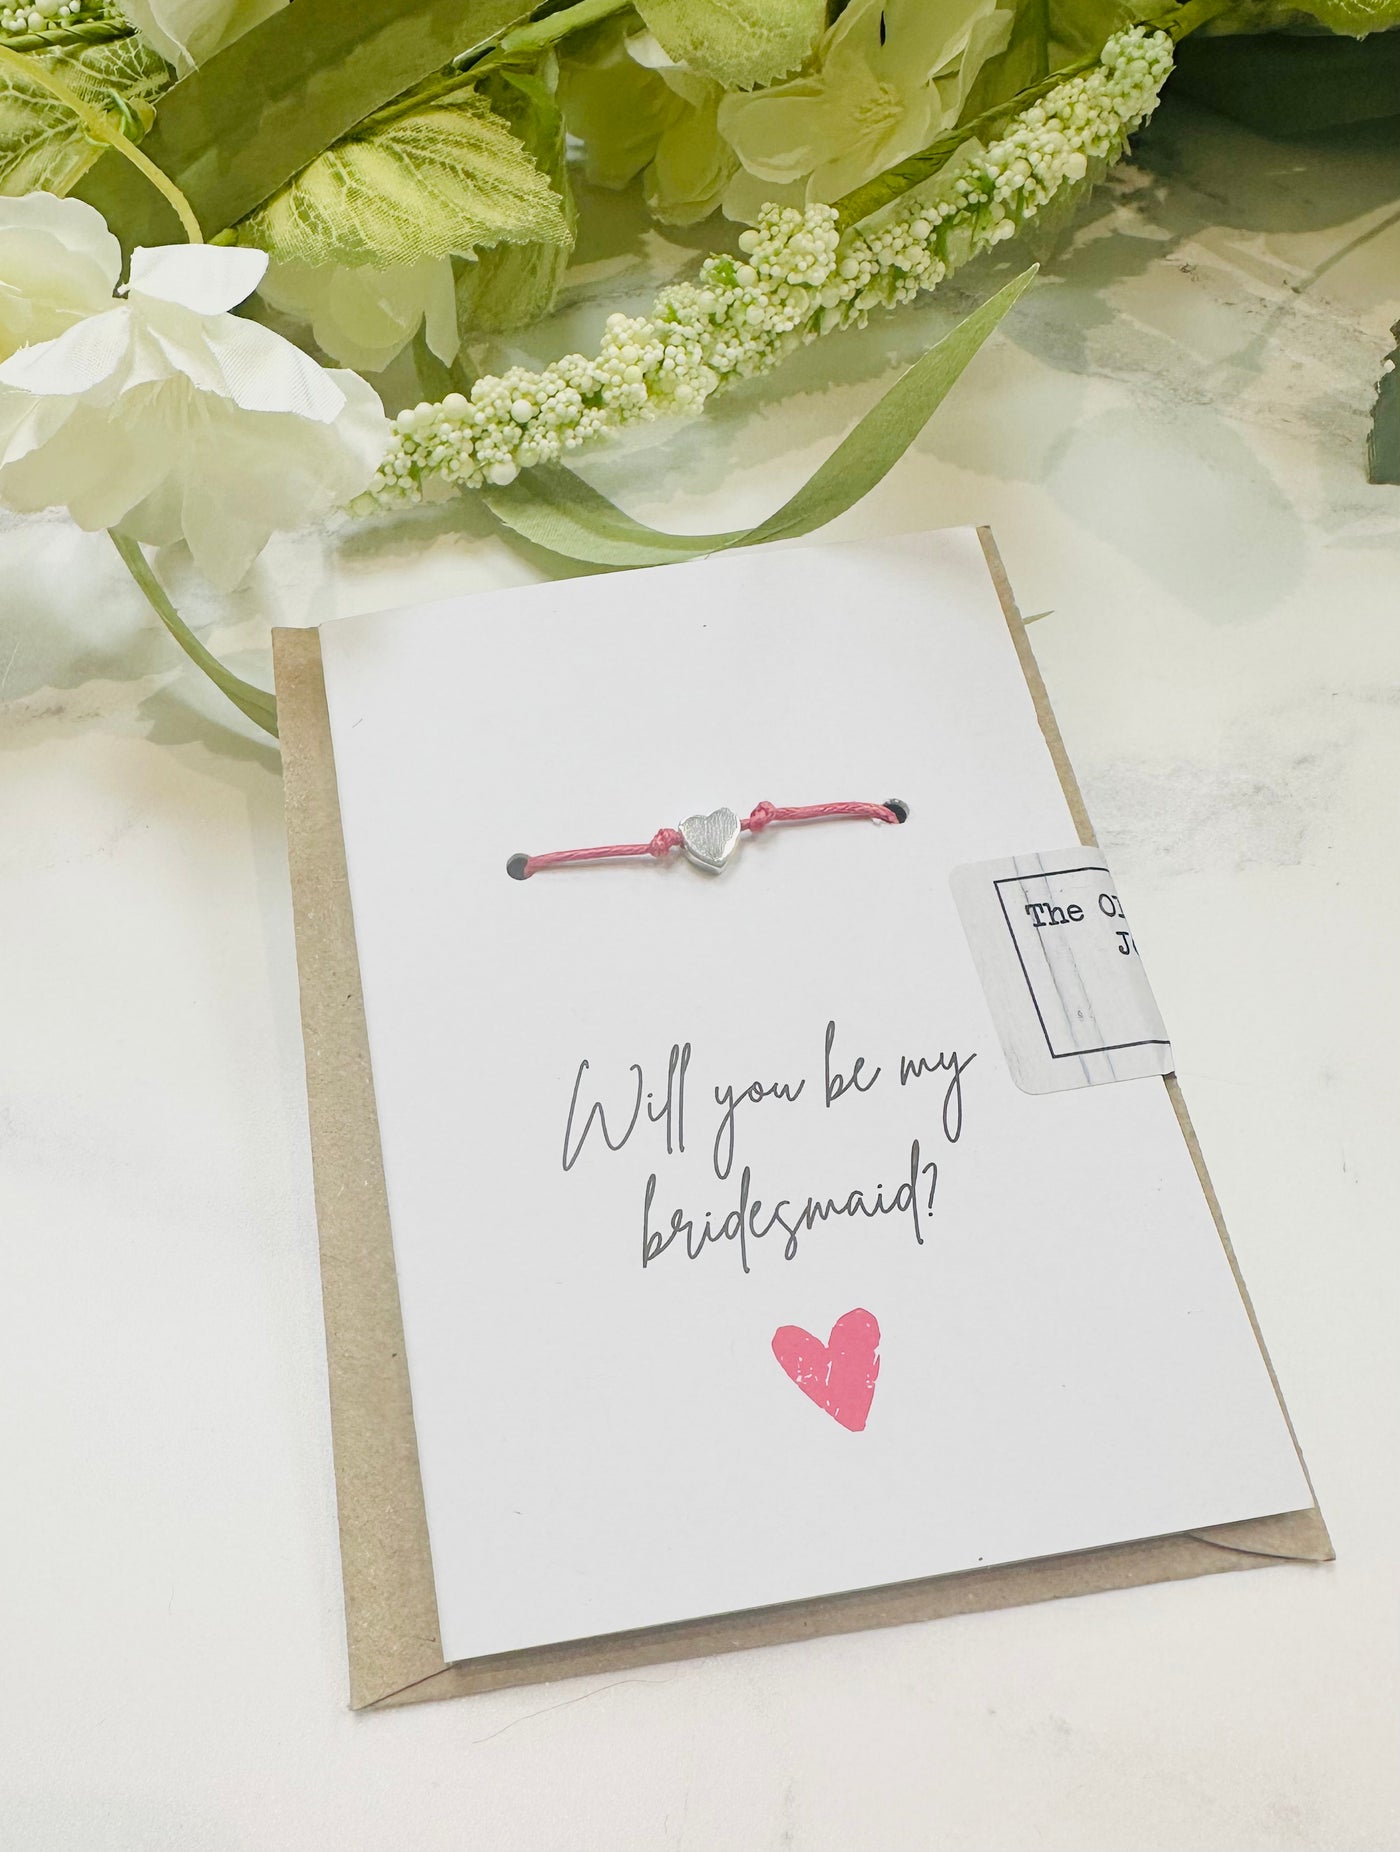 Will You Be My Bridesmaid? - Heart Pink Wish Bracelet